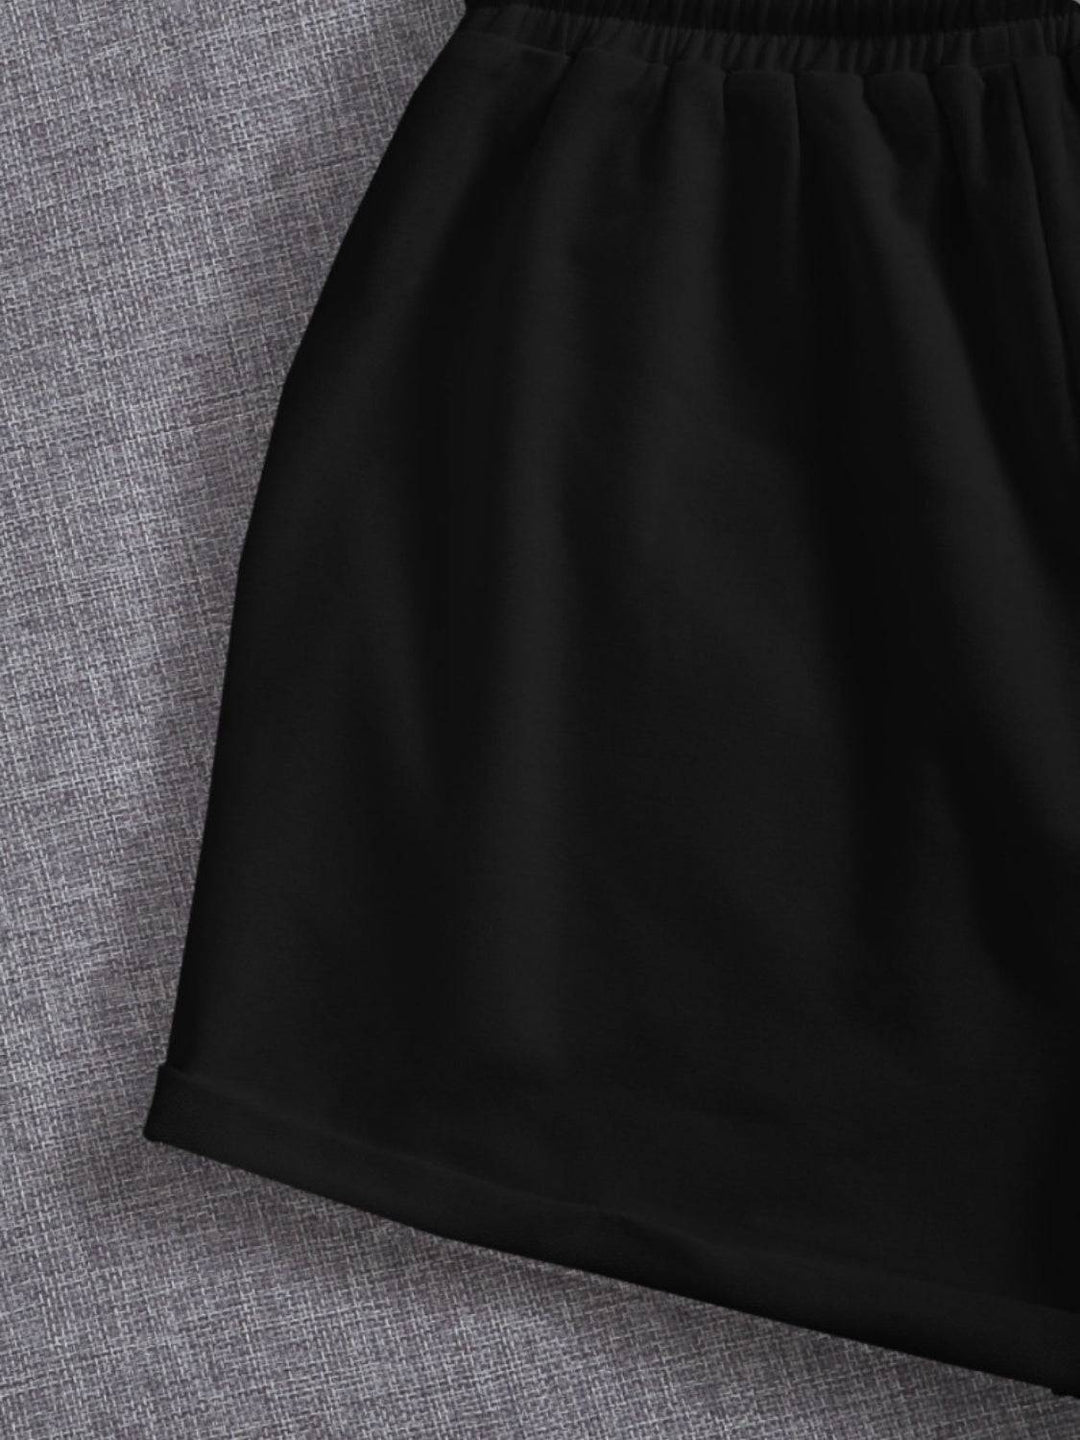 a close up of a black skirt on a gray background